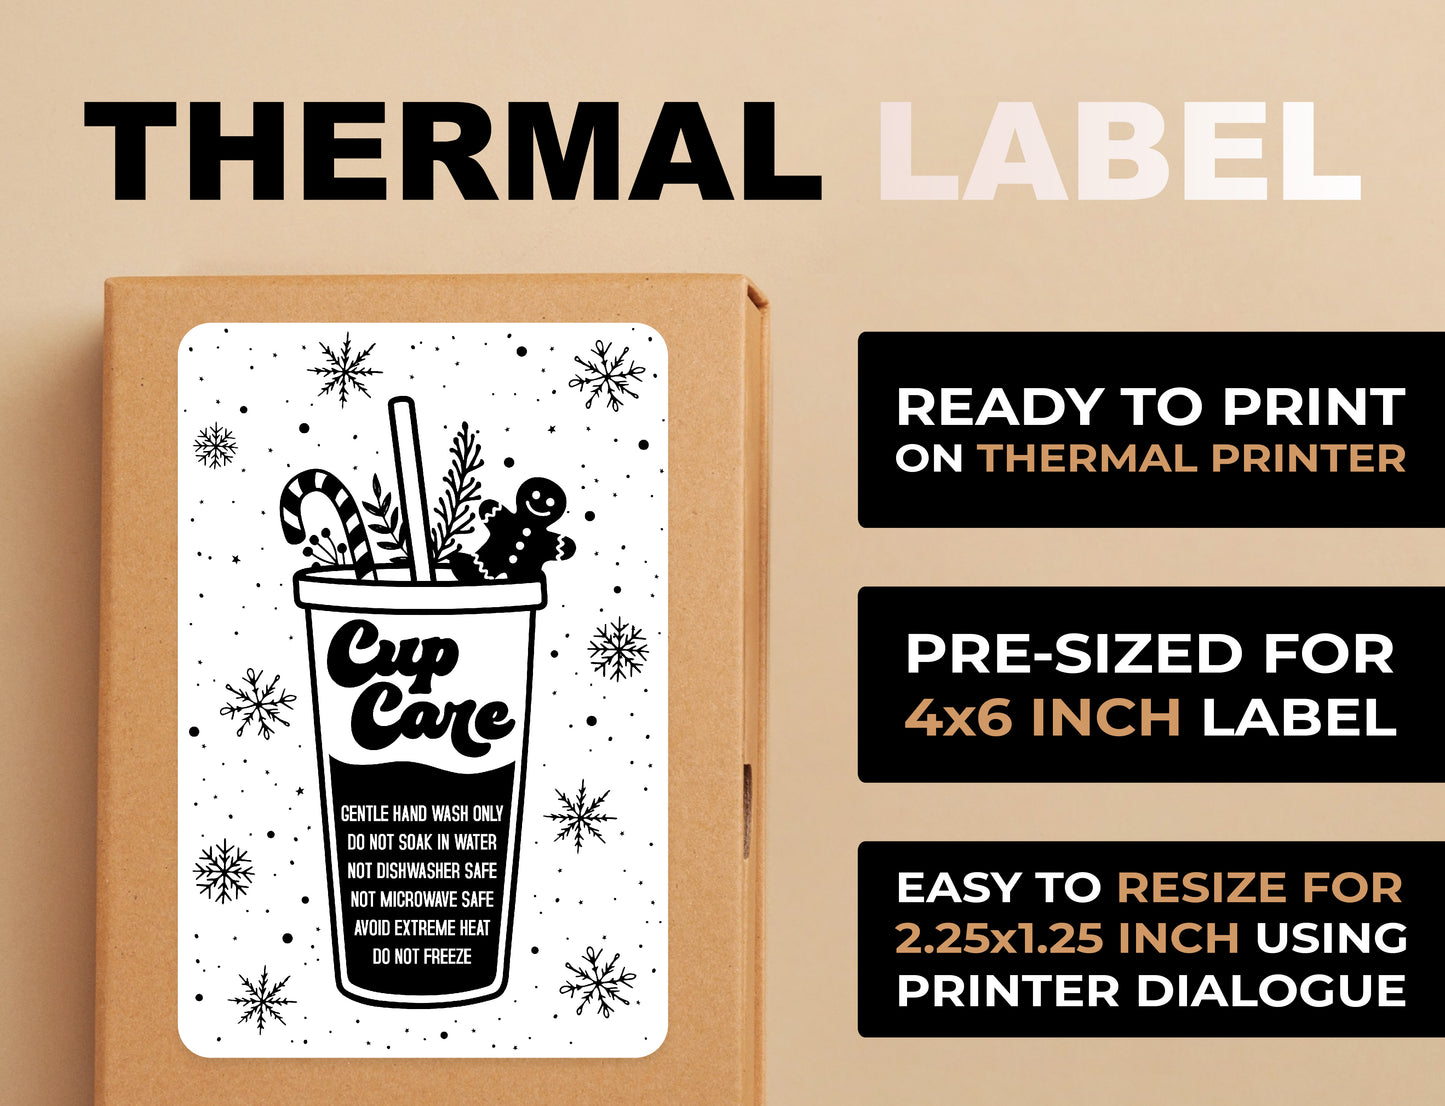 Christmas Cold Cup Care Thermal Label